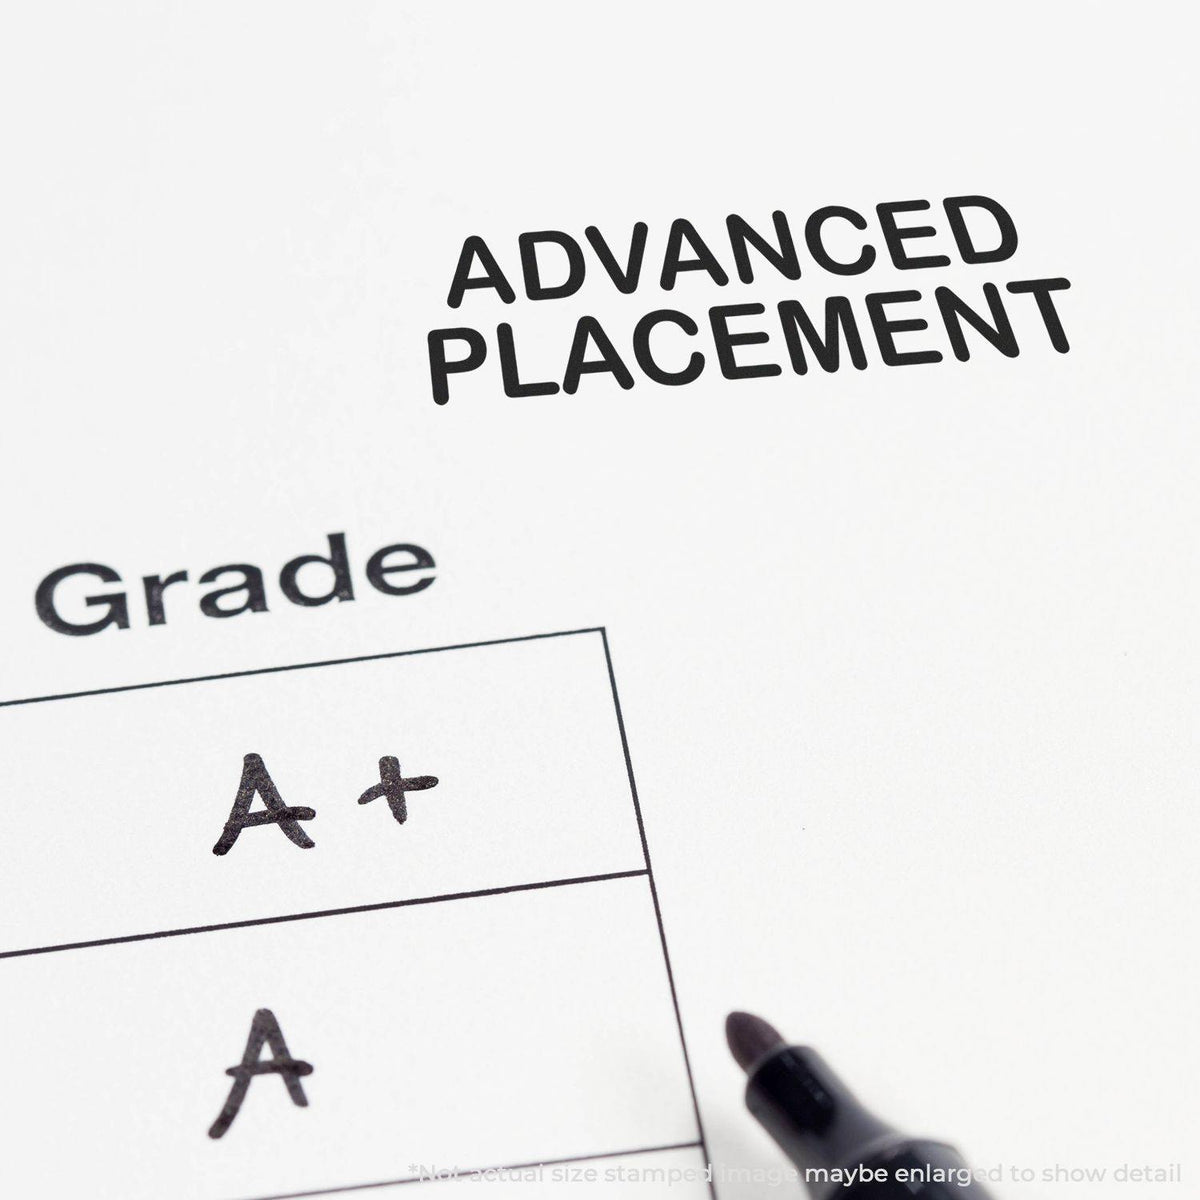 Large Advanced Placement Rubber Stamp In Use Photo